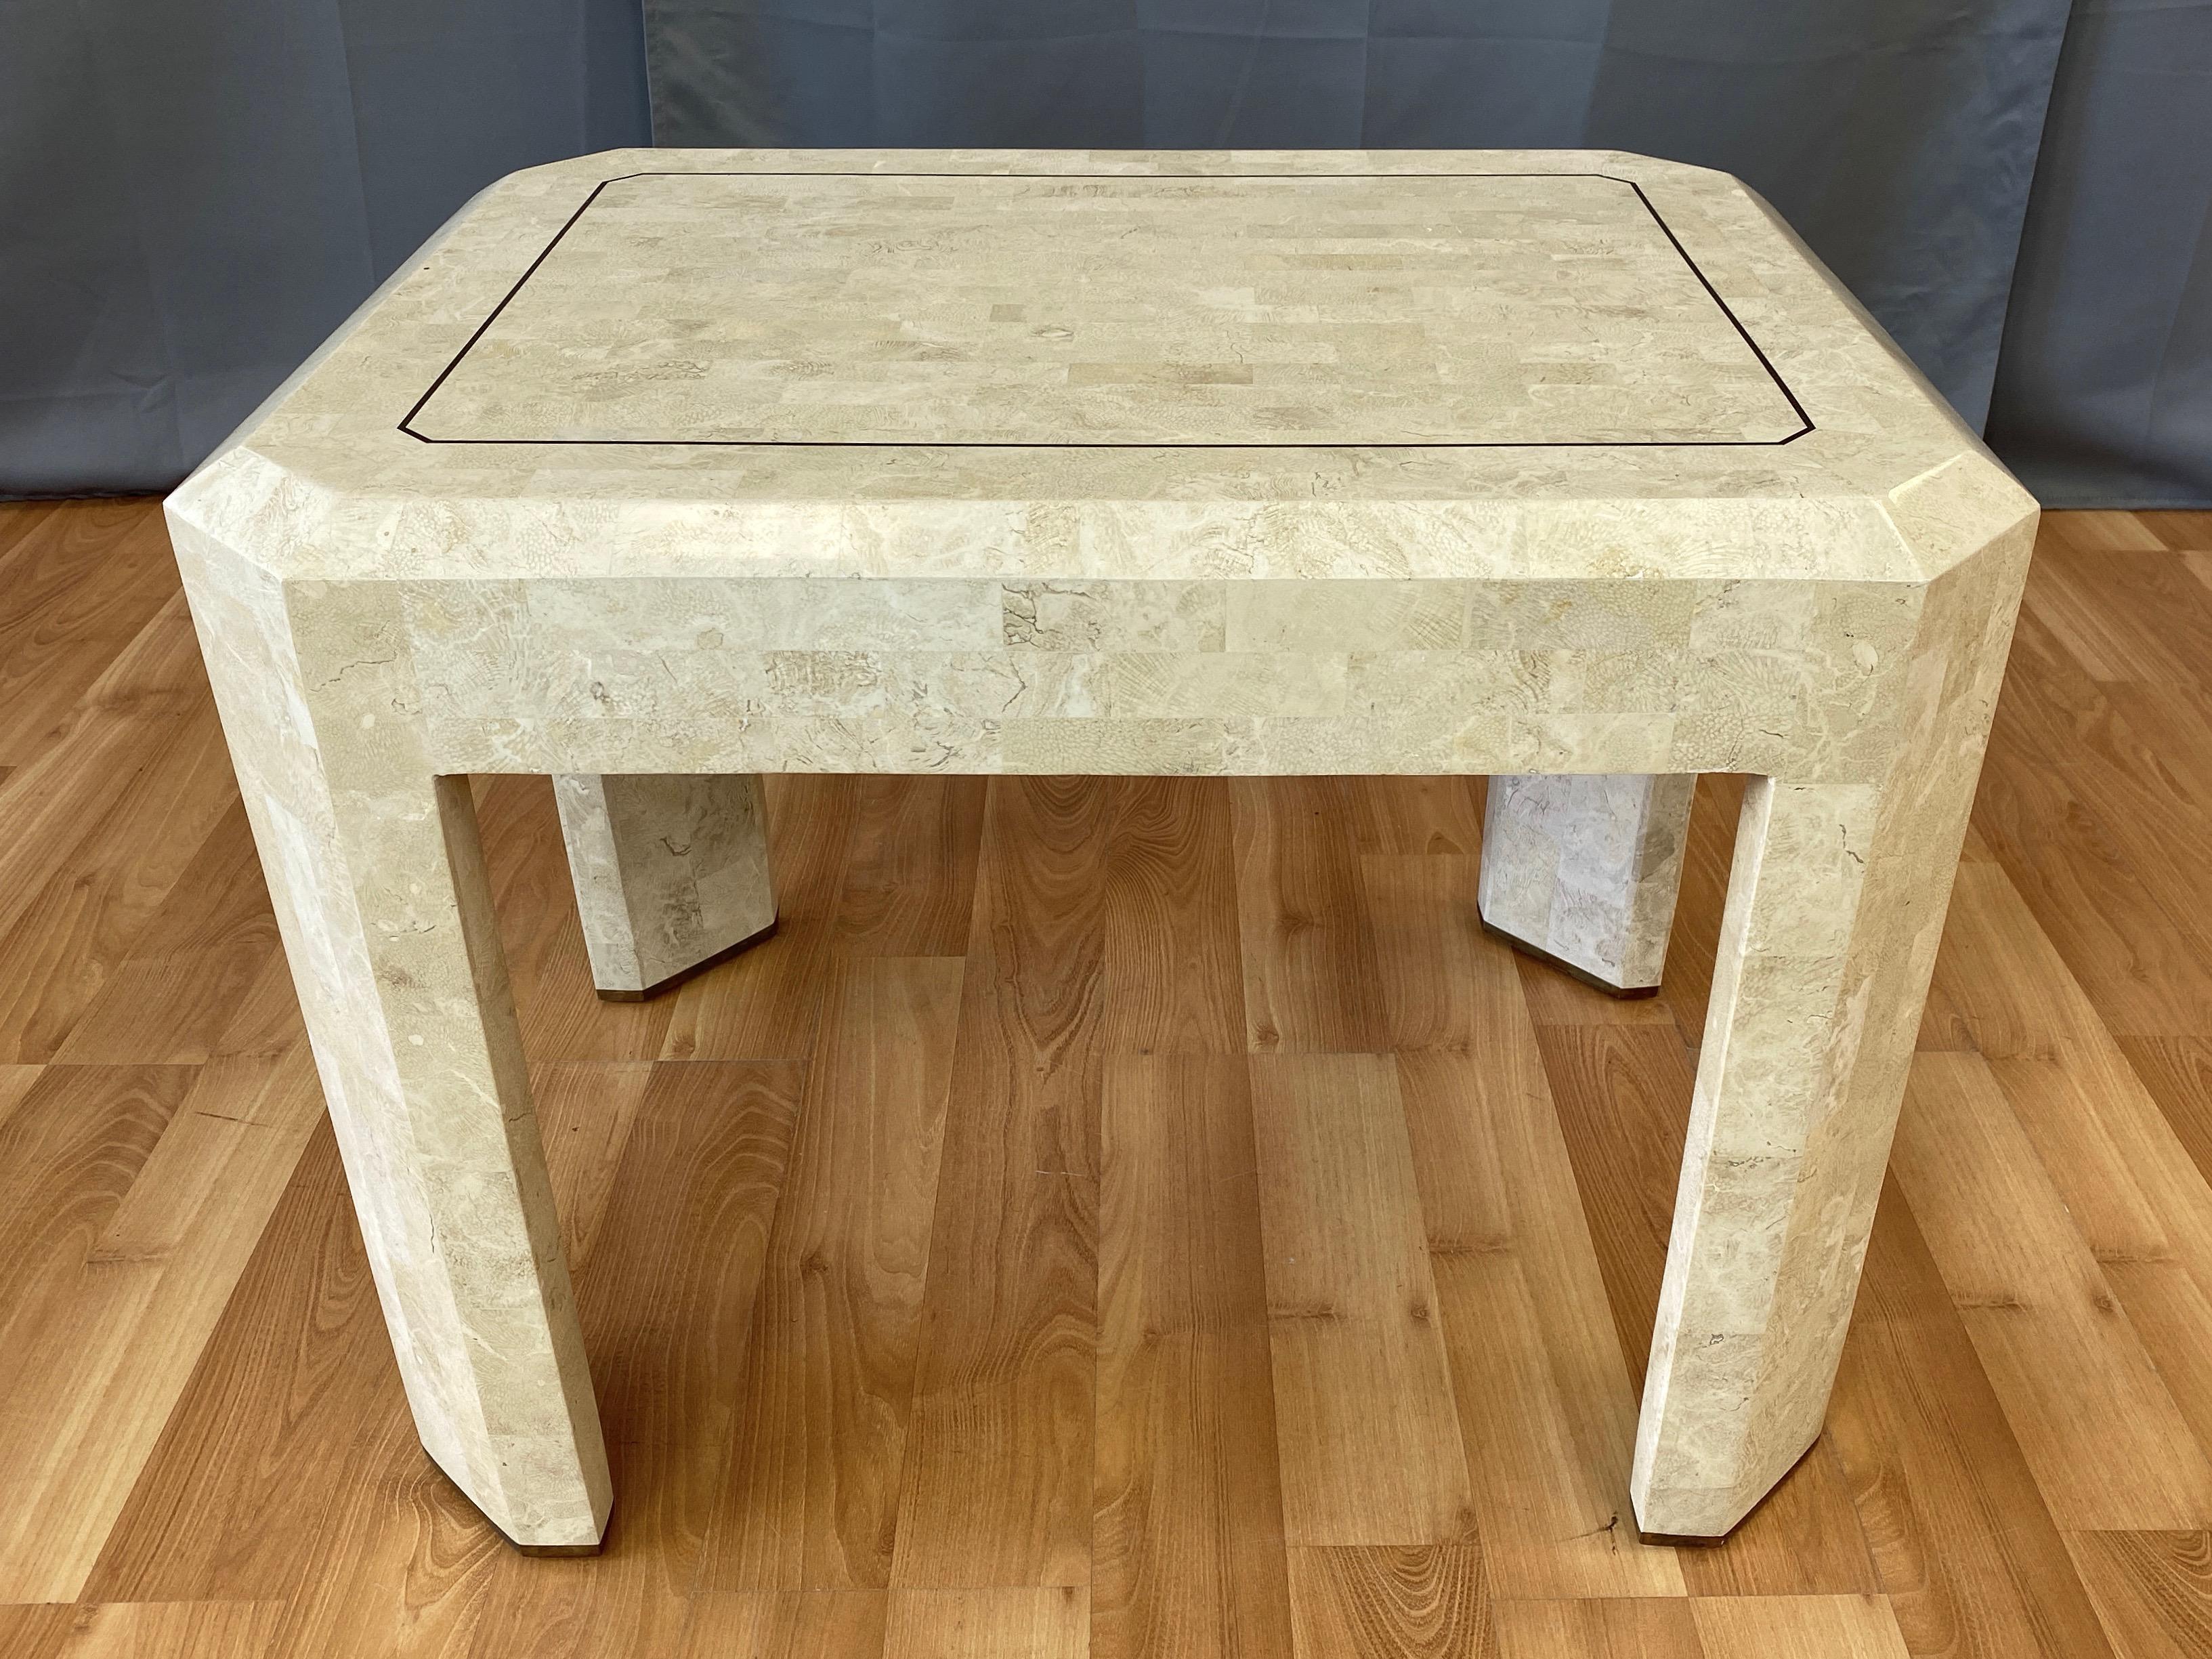 A 1970s tessellated fossil side or cocktail table with brass accents by Maitland-Smith.

Clean rectangular form with wide legs and broadly beveled edges fully finished in smooth, limestone-like fossil tiles. Thin inlayed brass detail on top echoed